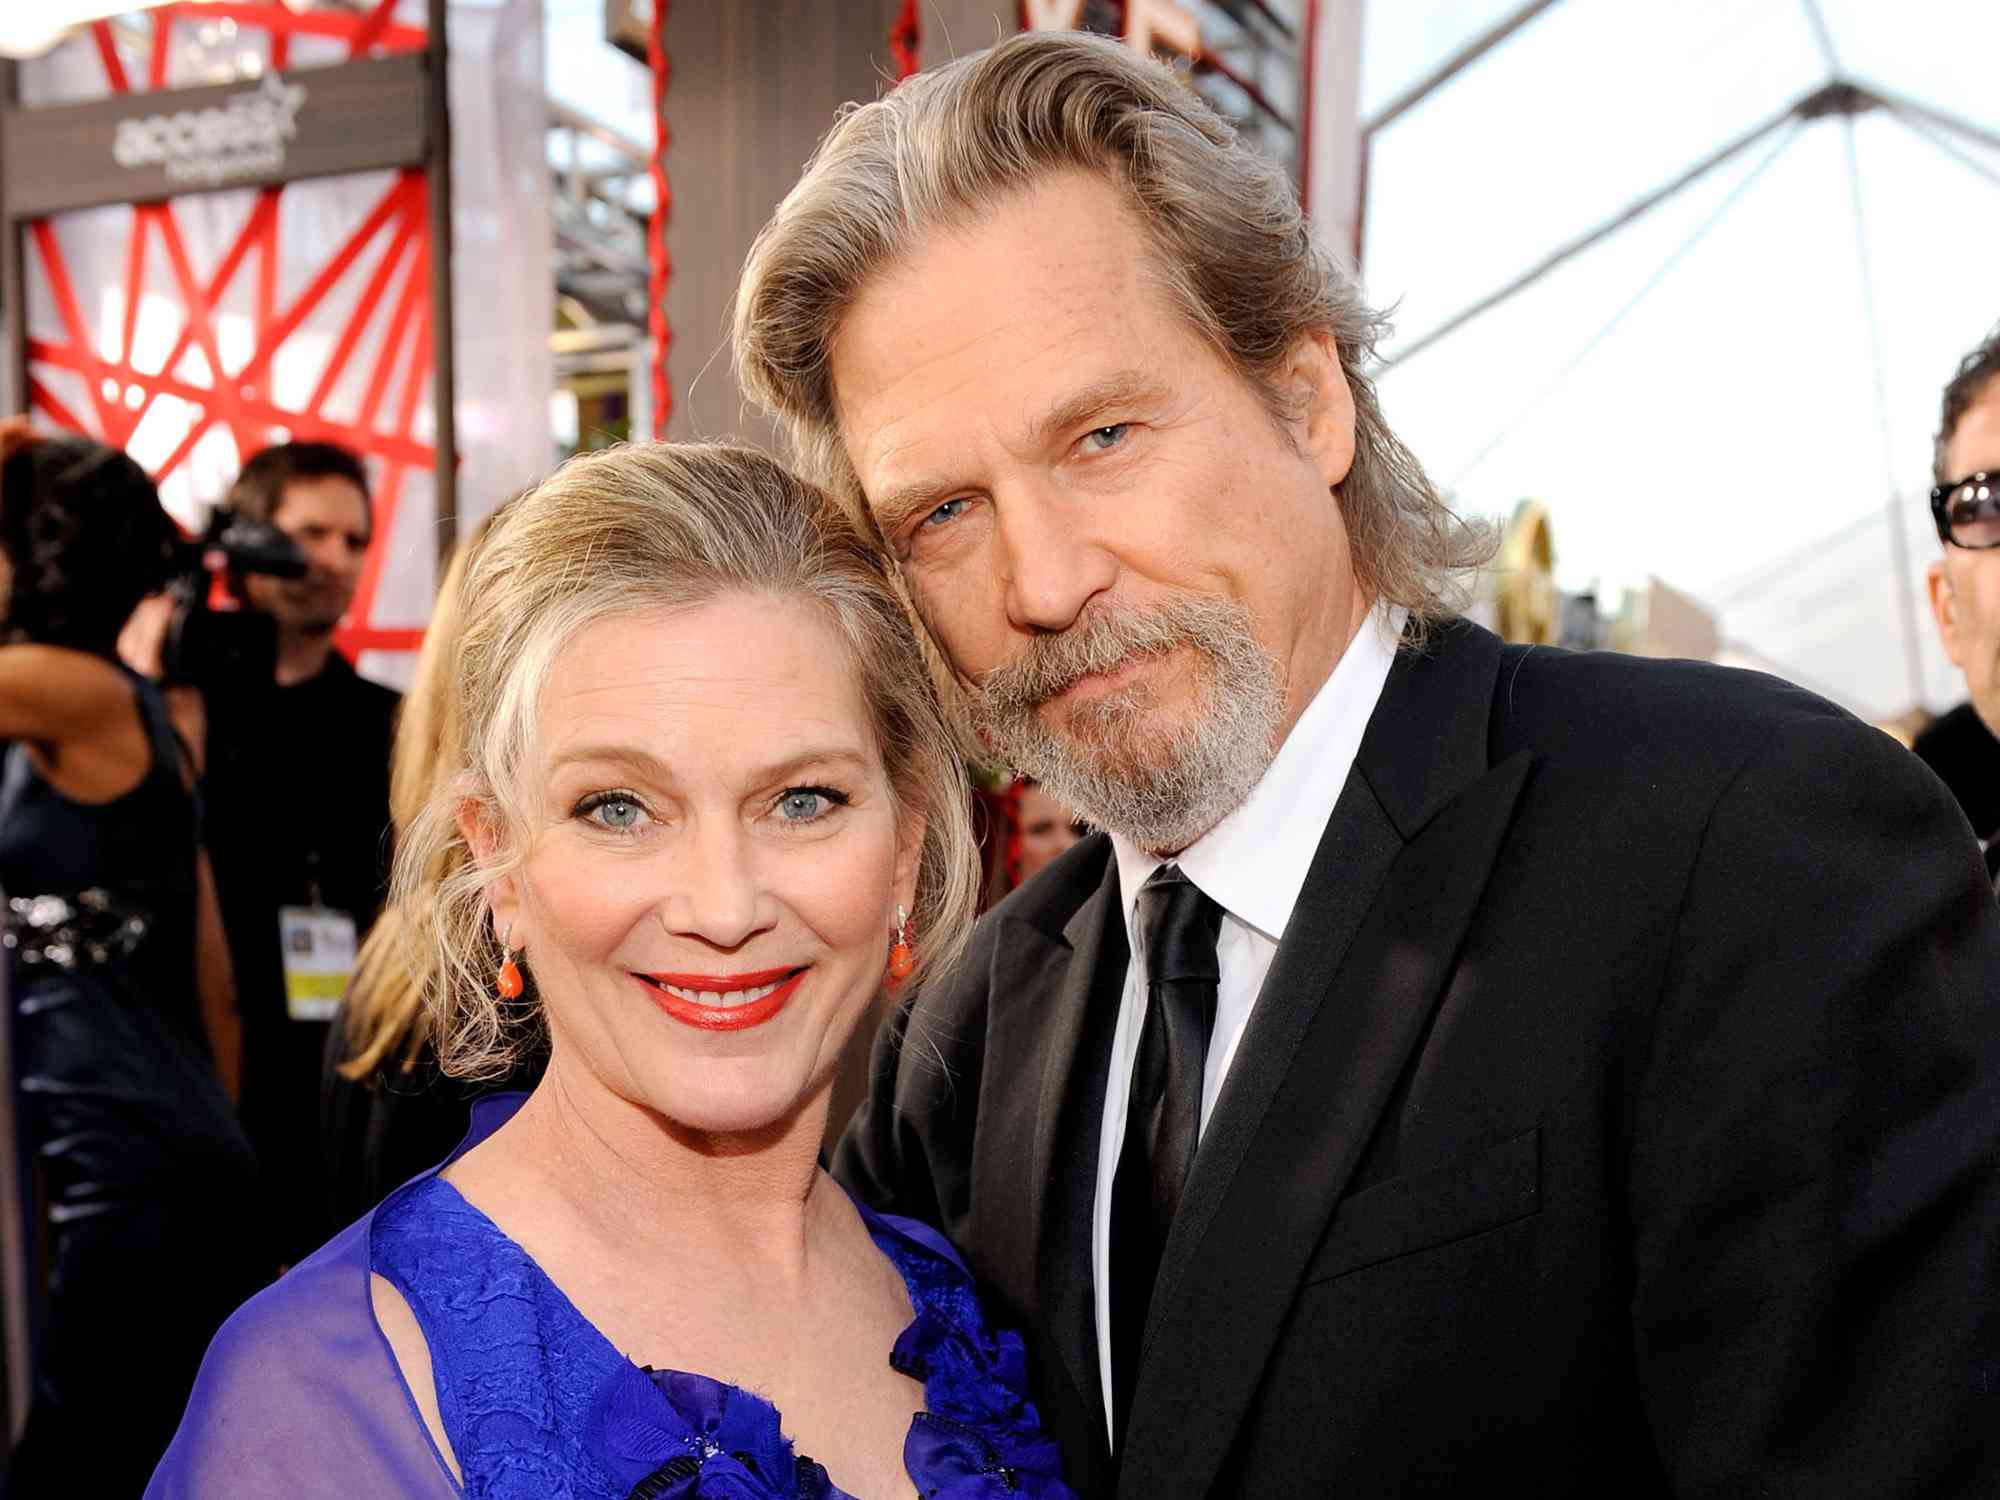 Susan Geston (L) and actor Jeff Bridges arrive at the 16th Annual Screen Actors Guild Awards held at the Shrine Auditorium on January 23, 2010 in Los Angeles, California